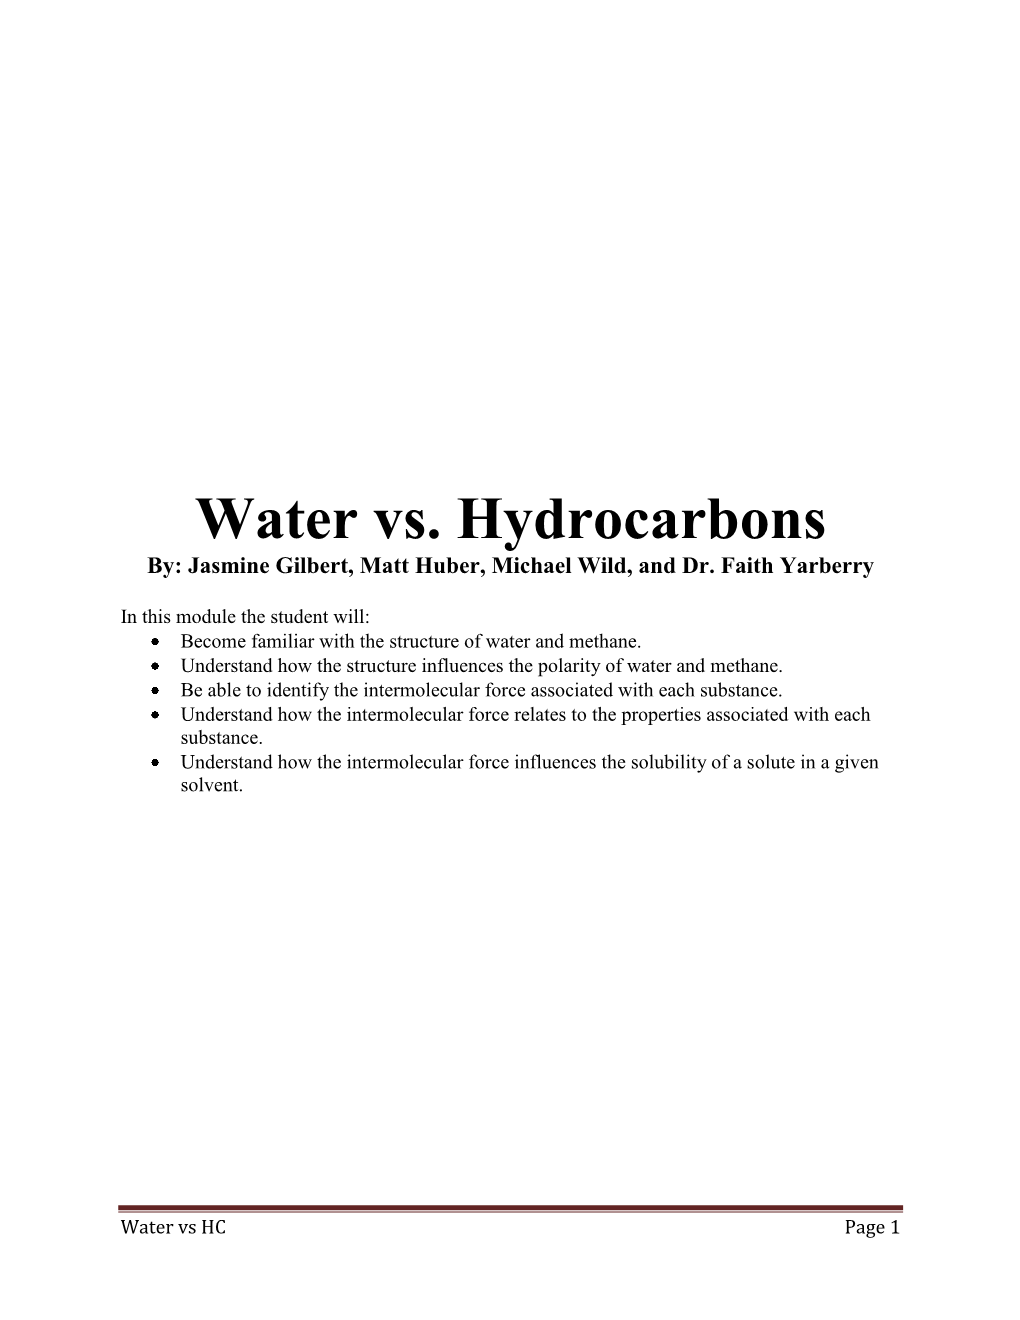 Water Vs. Hydrocarbons By: Jasmine Gilbert, Matt Huber, Michael Wild, and Dr